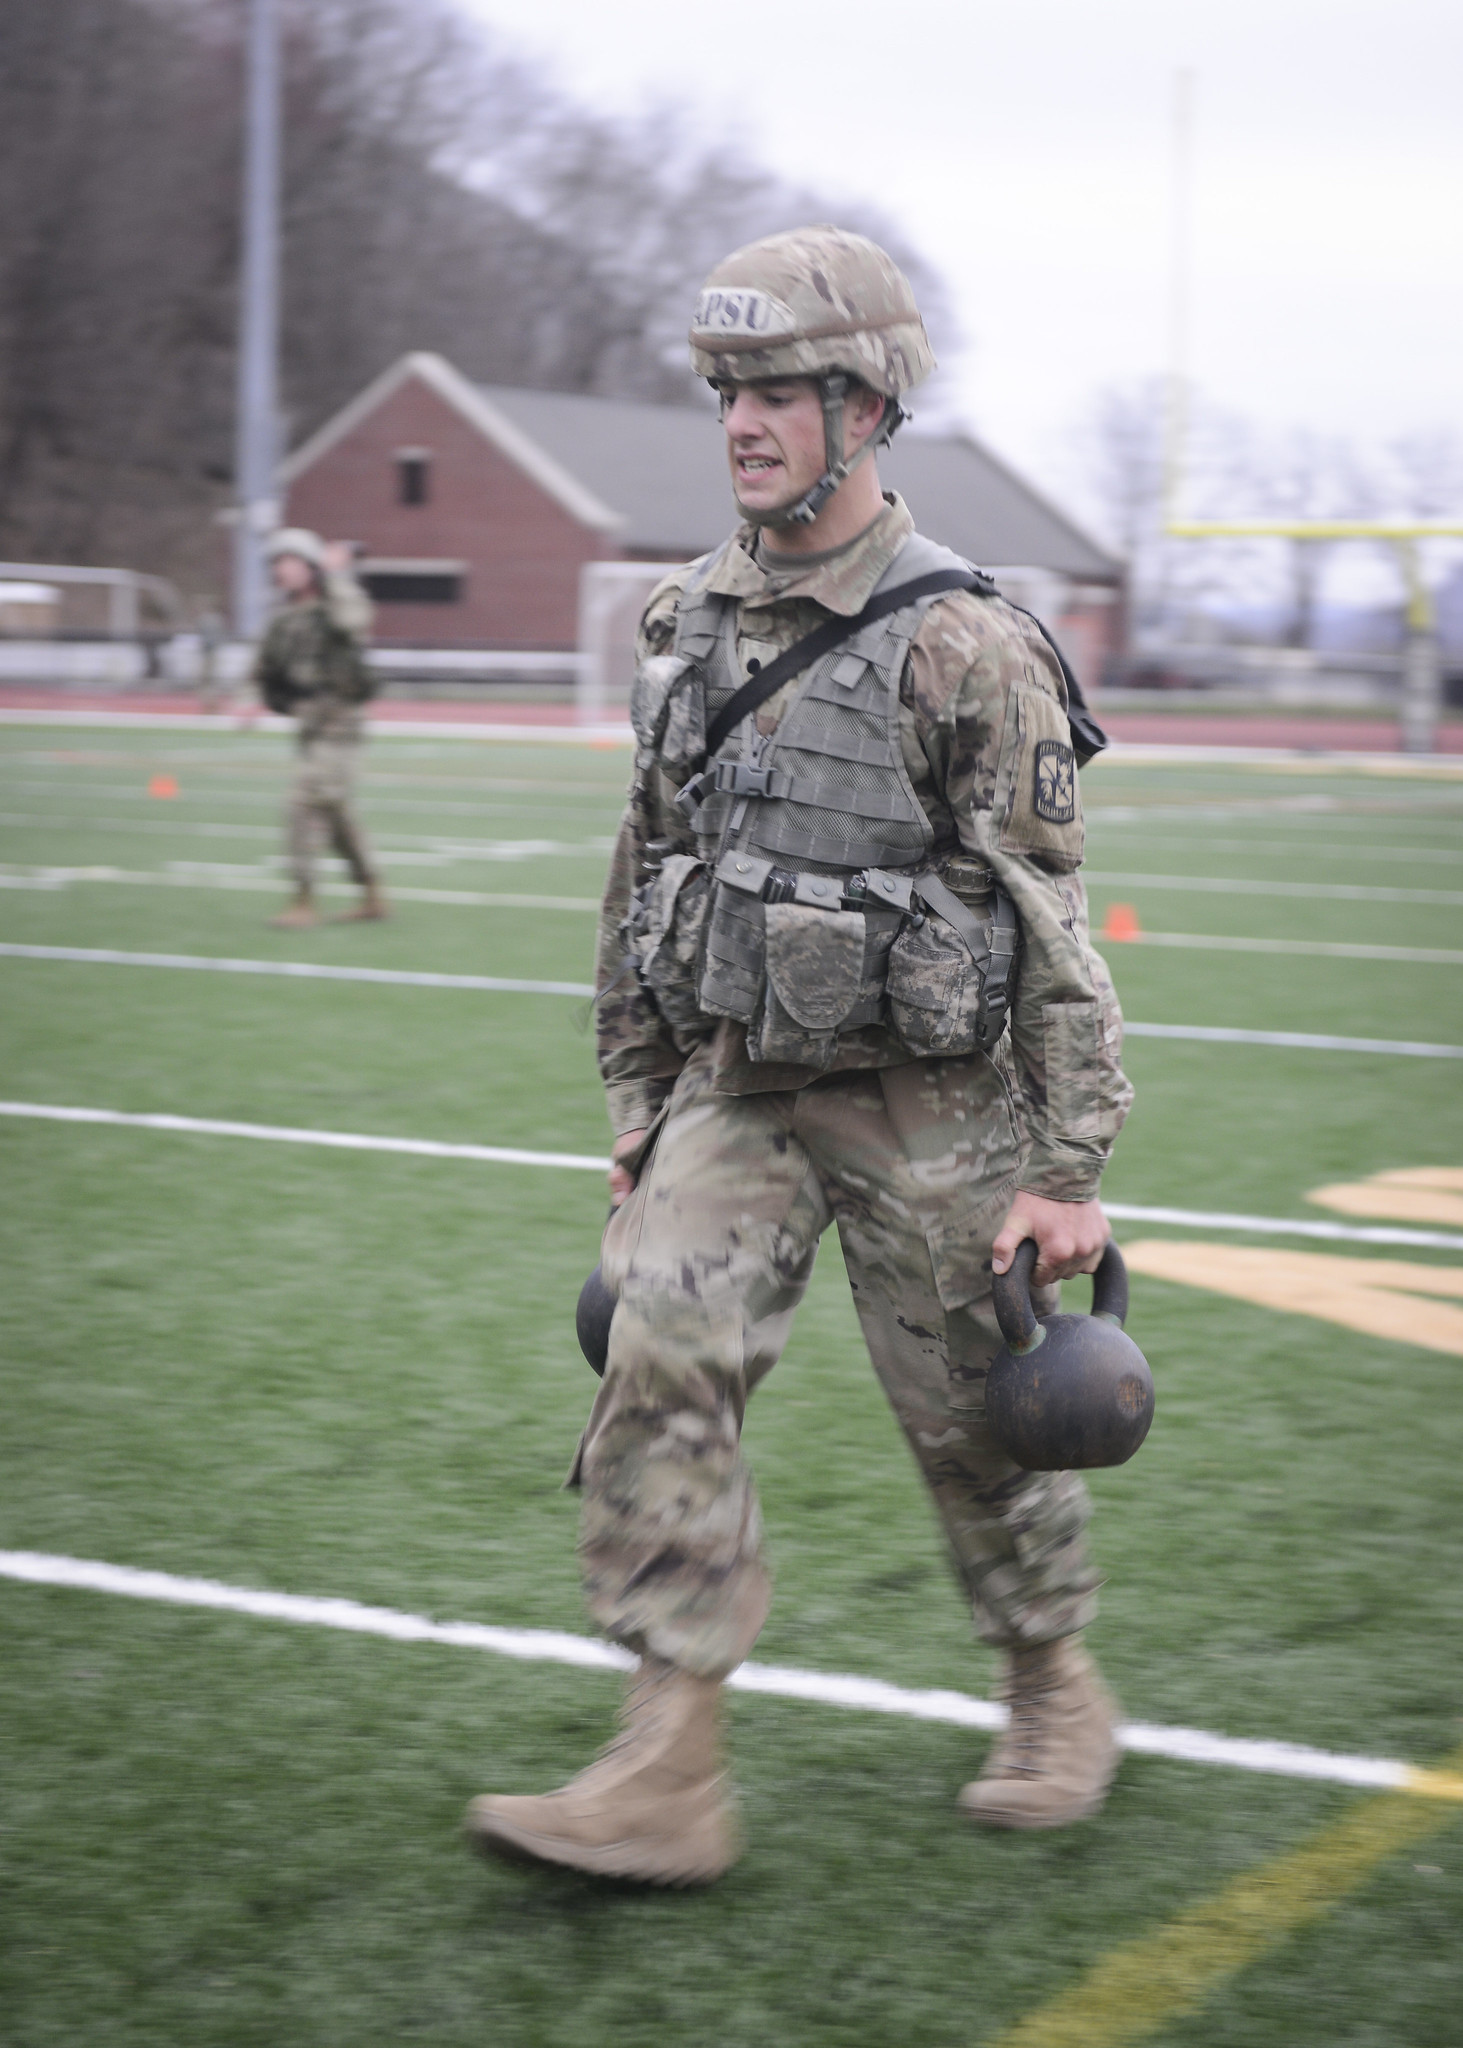 Cadet Thomas Porter performs during the Sandhurst competition April 13-14 at West Point, New York.